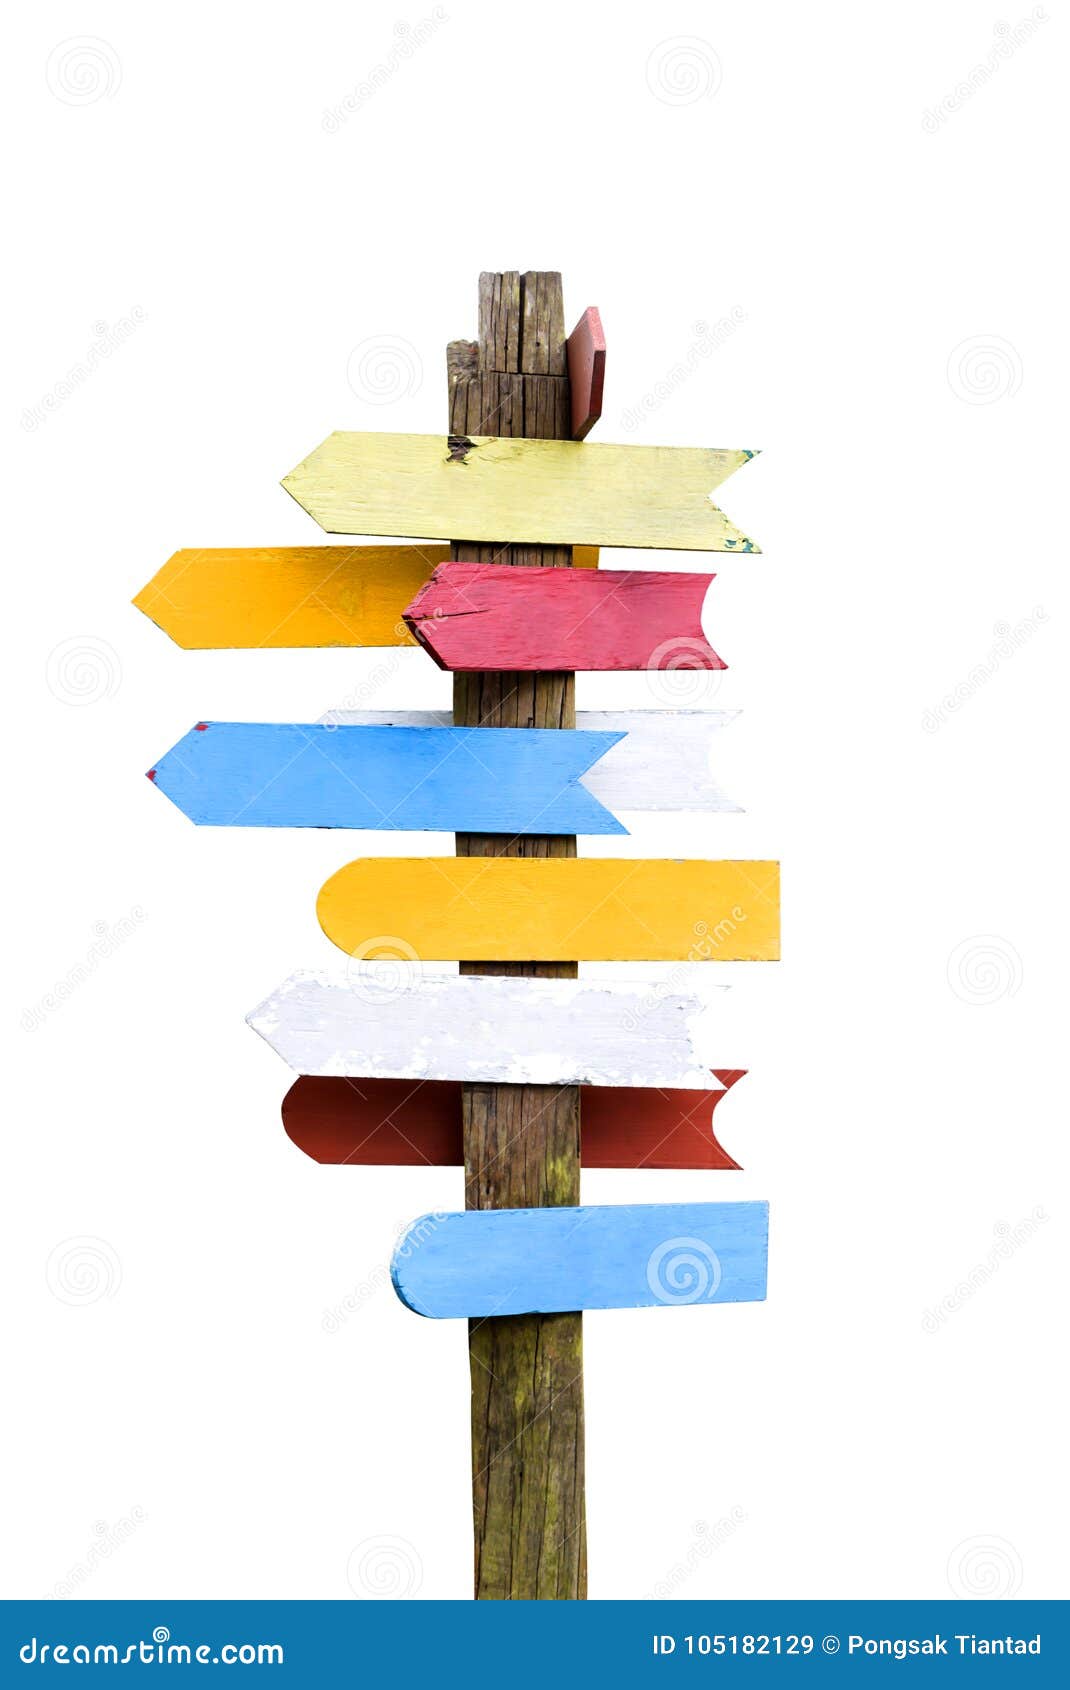 wooden signboards pointing different directions.